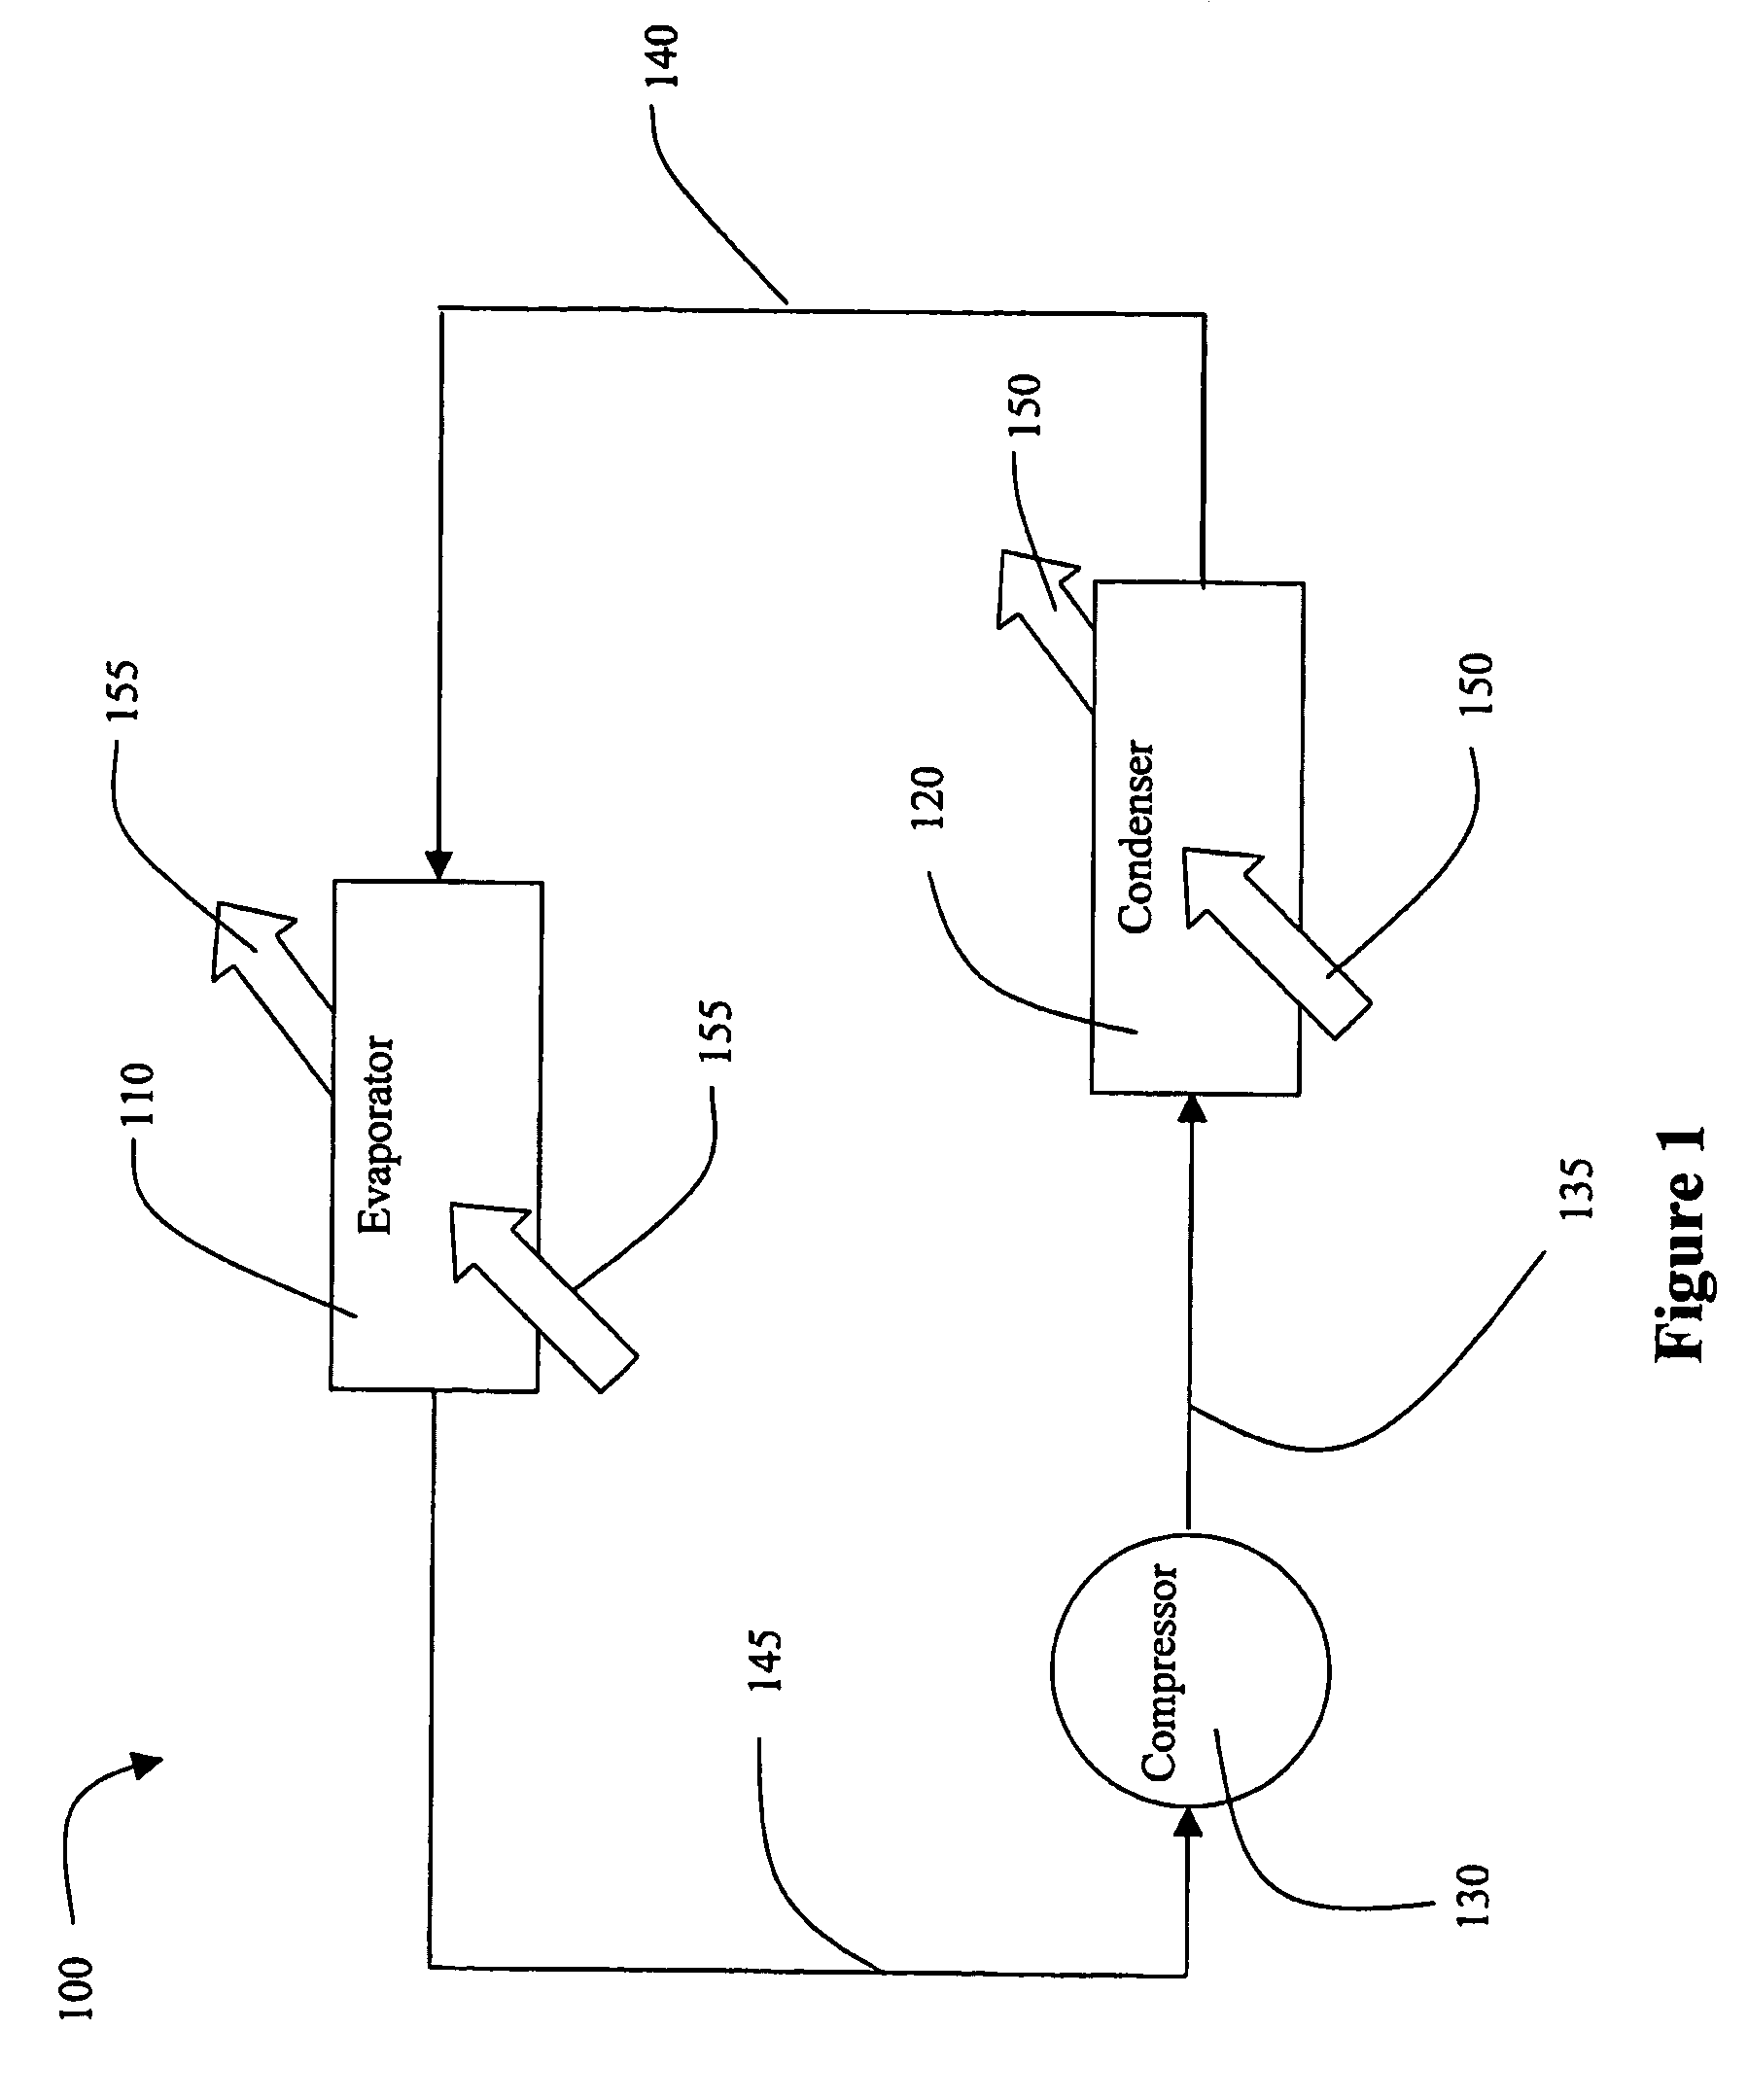 Method and apparatus to sense and control compressor operation in an HVAC system